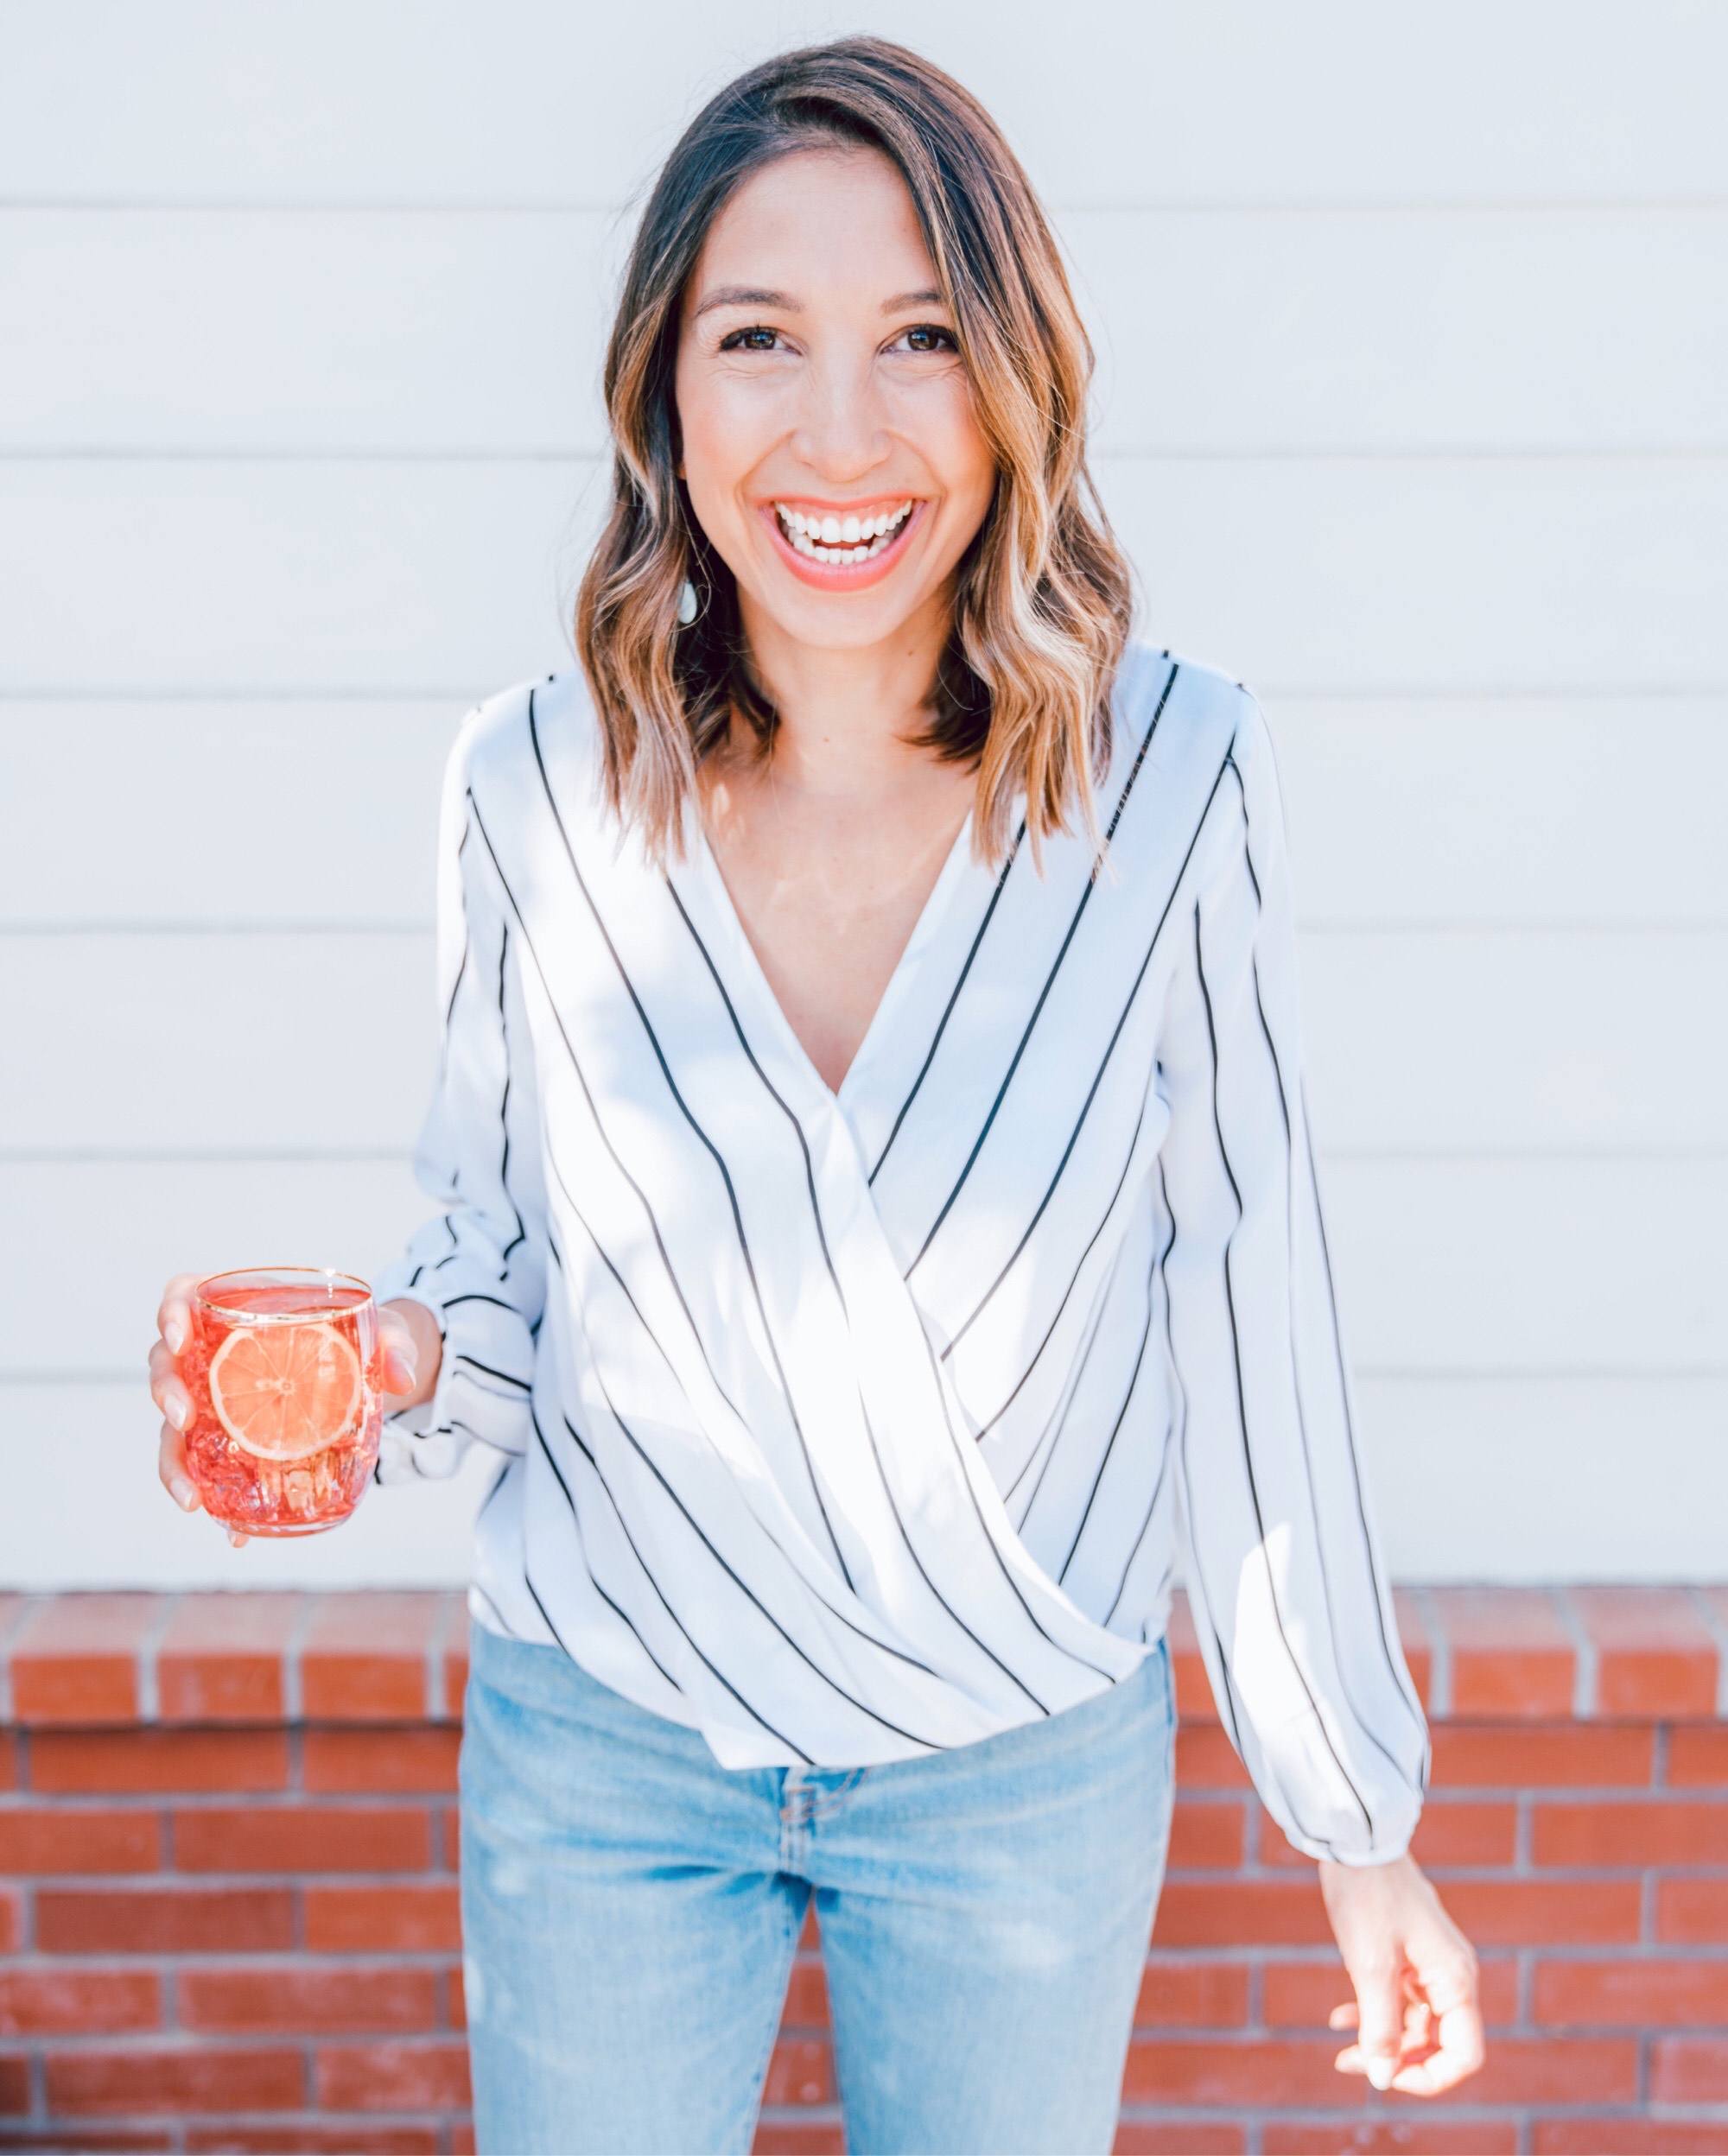 Woman in striped shirt and jeans, smiling and holding a cocktail